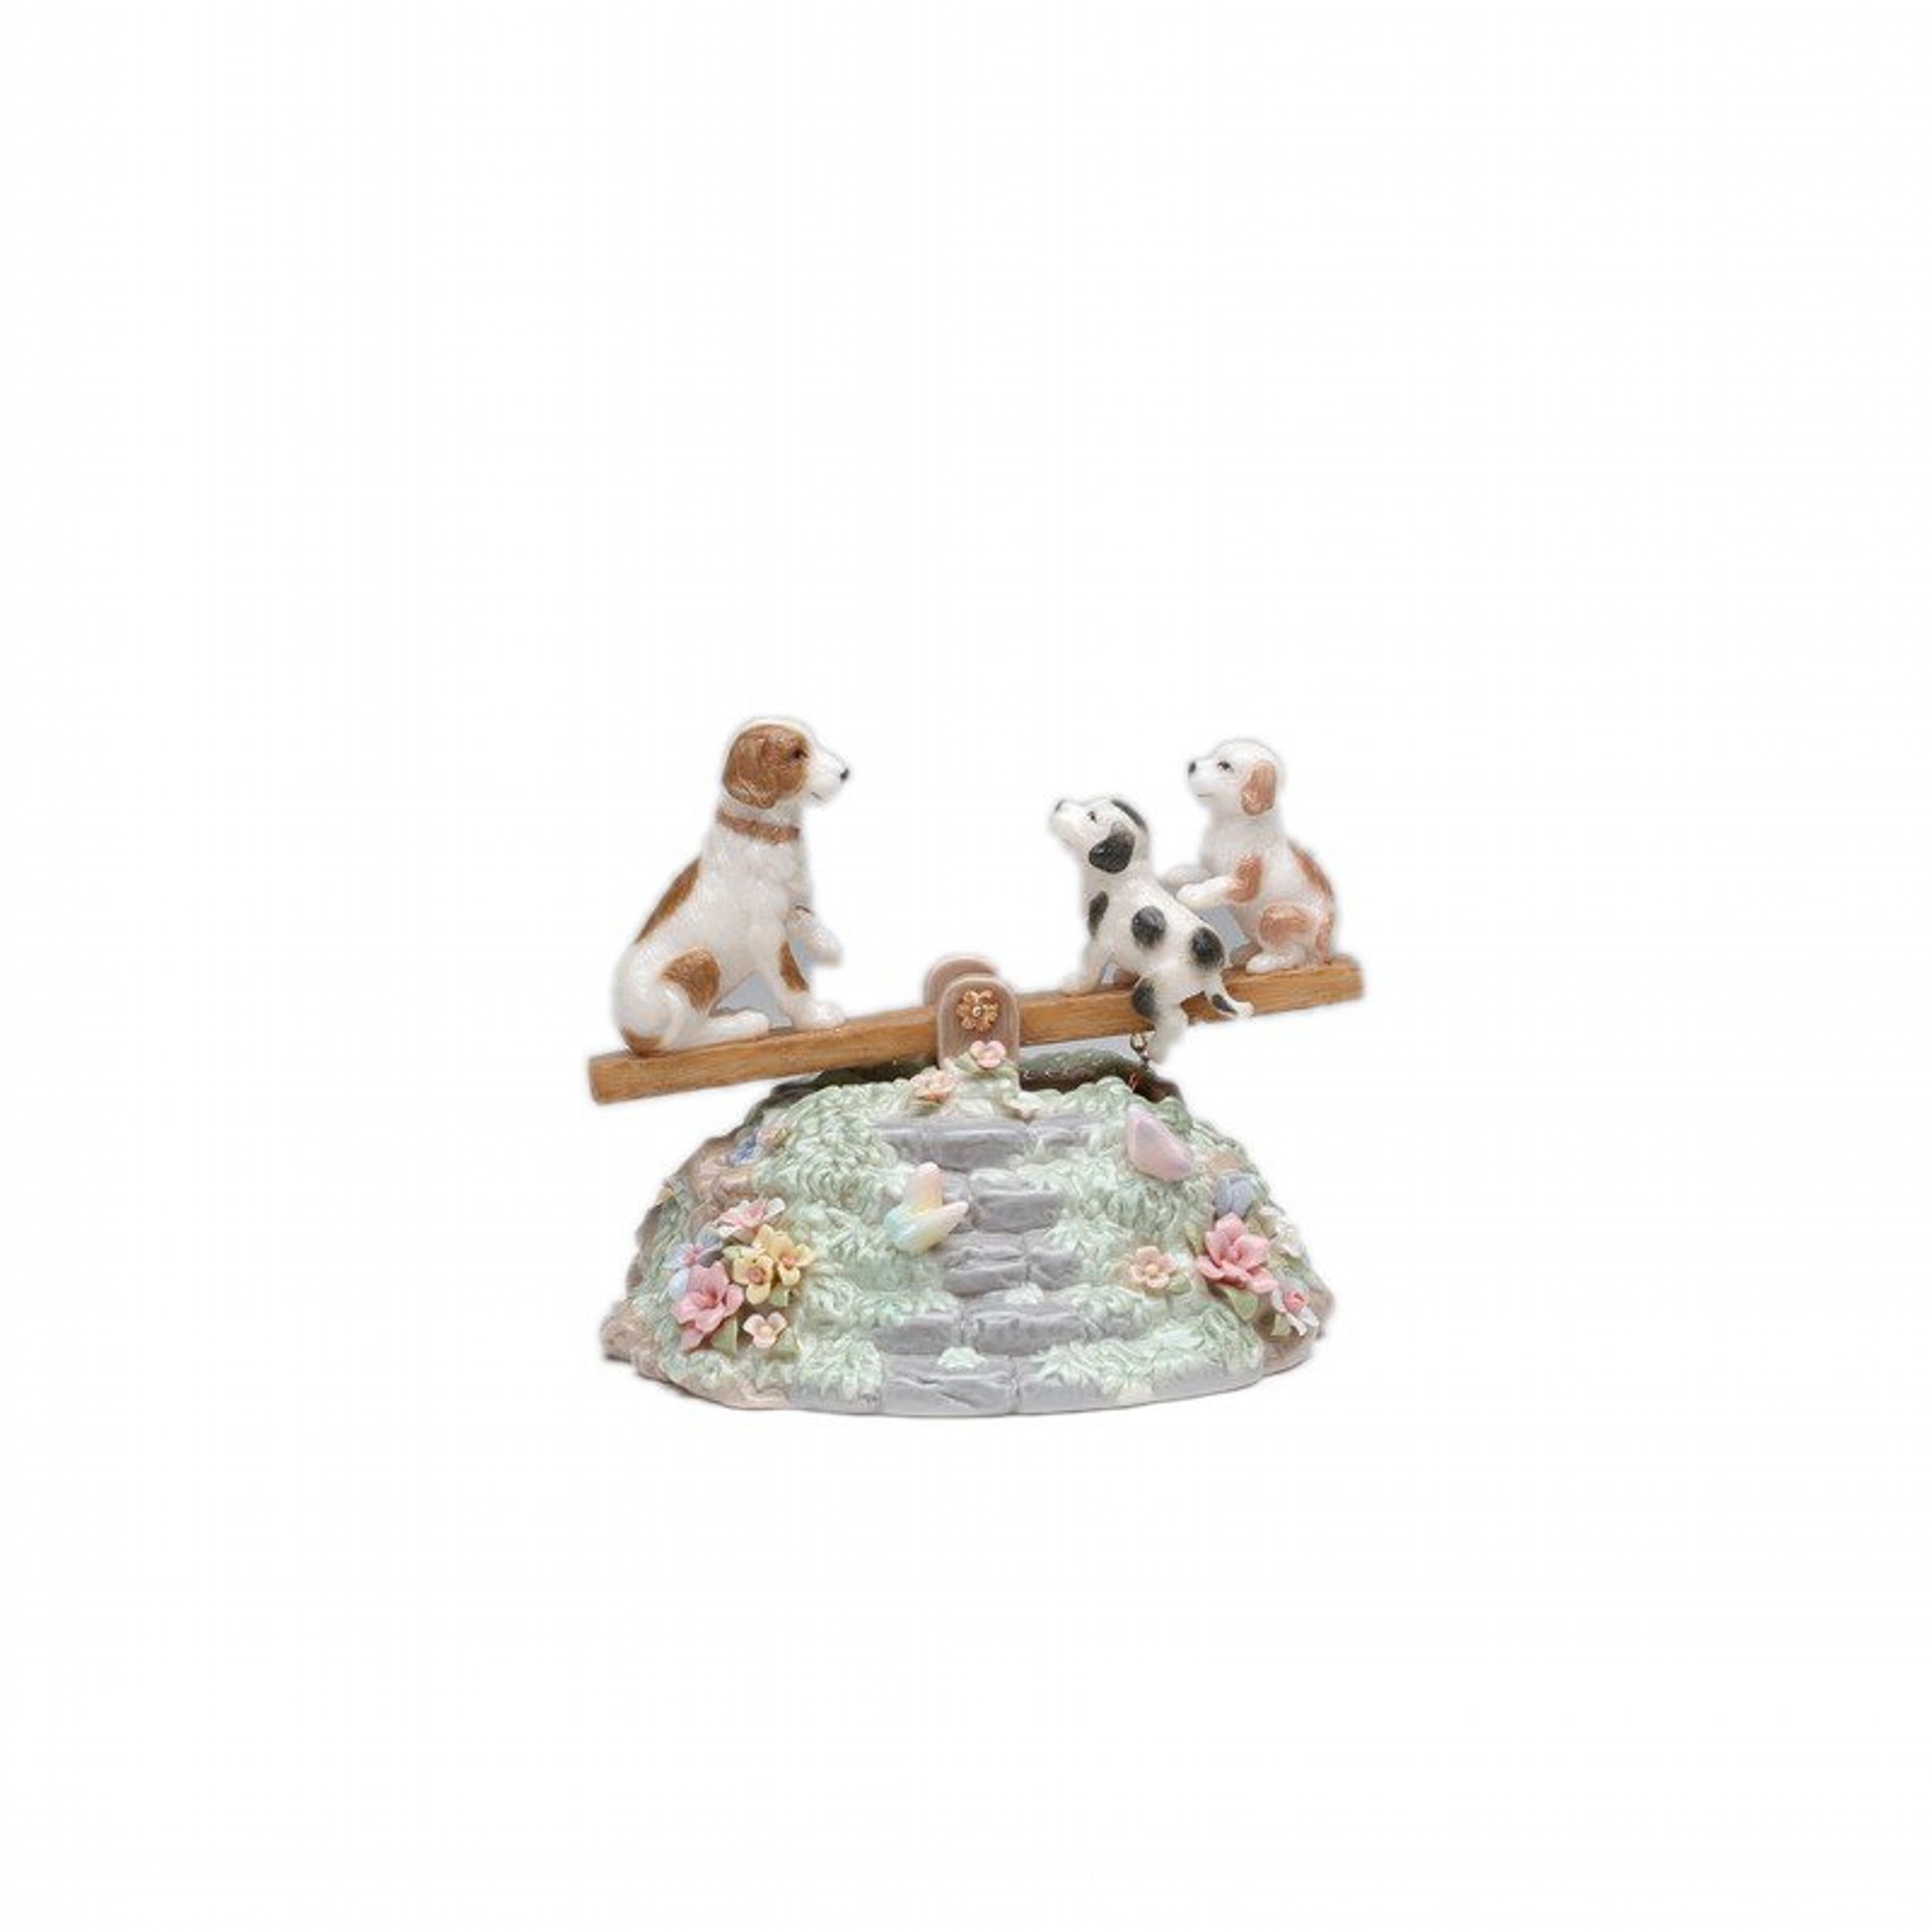 Cosmos SA49112 Fine Porcelain Puppies on Seesaw Musical Figurine 4-1/4-Inch 